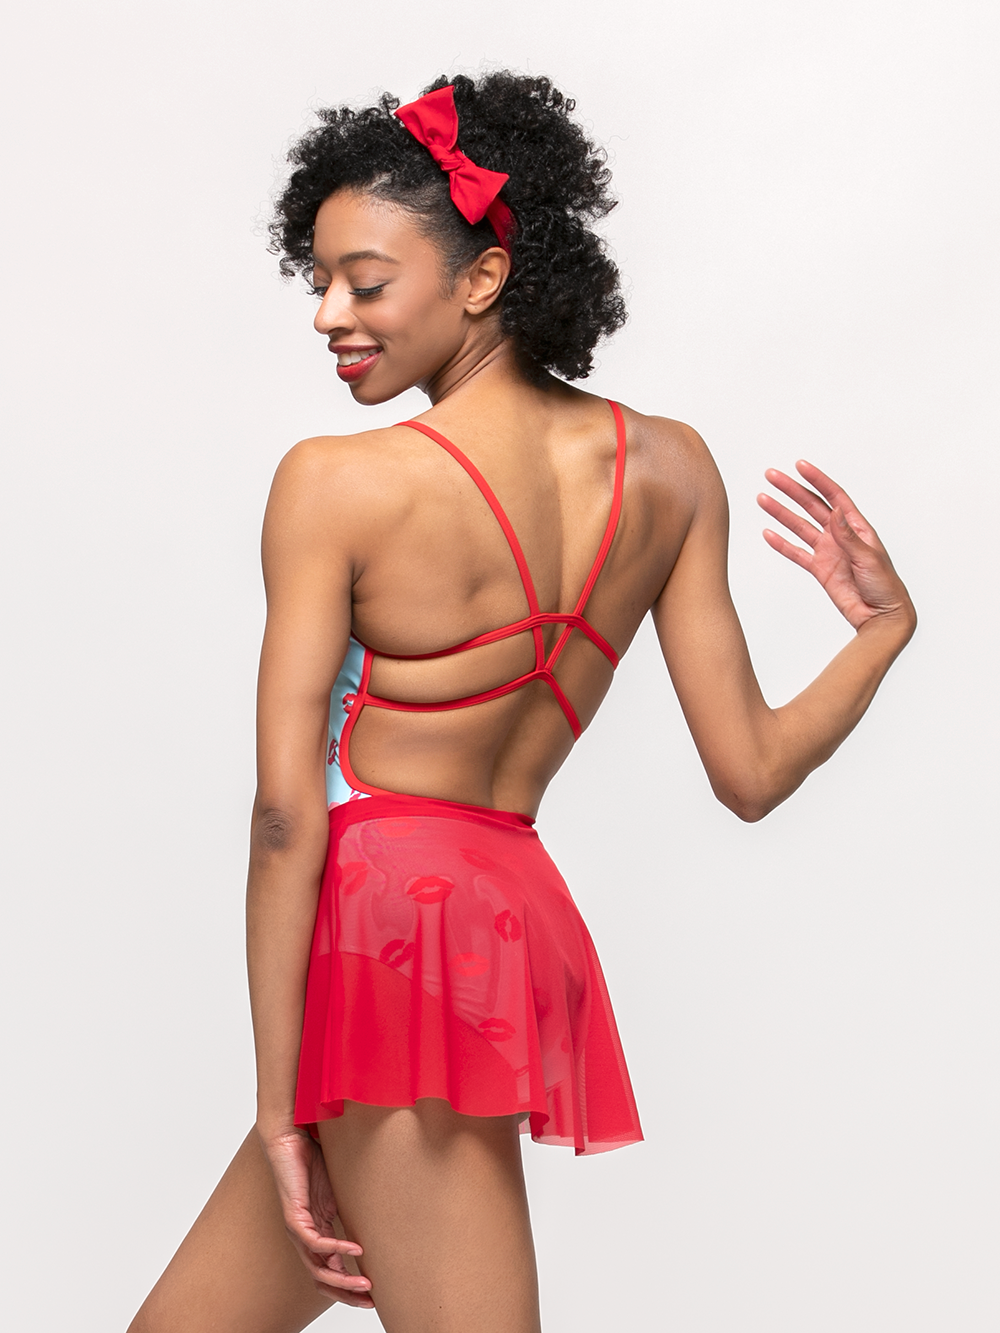 The Flare Skirt - Customize this Classic Dance Skirt for Ballet or